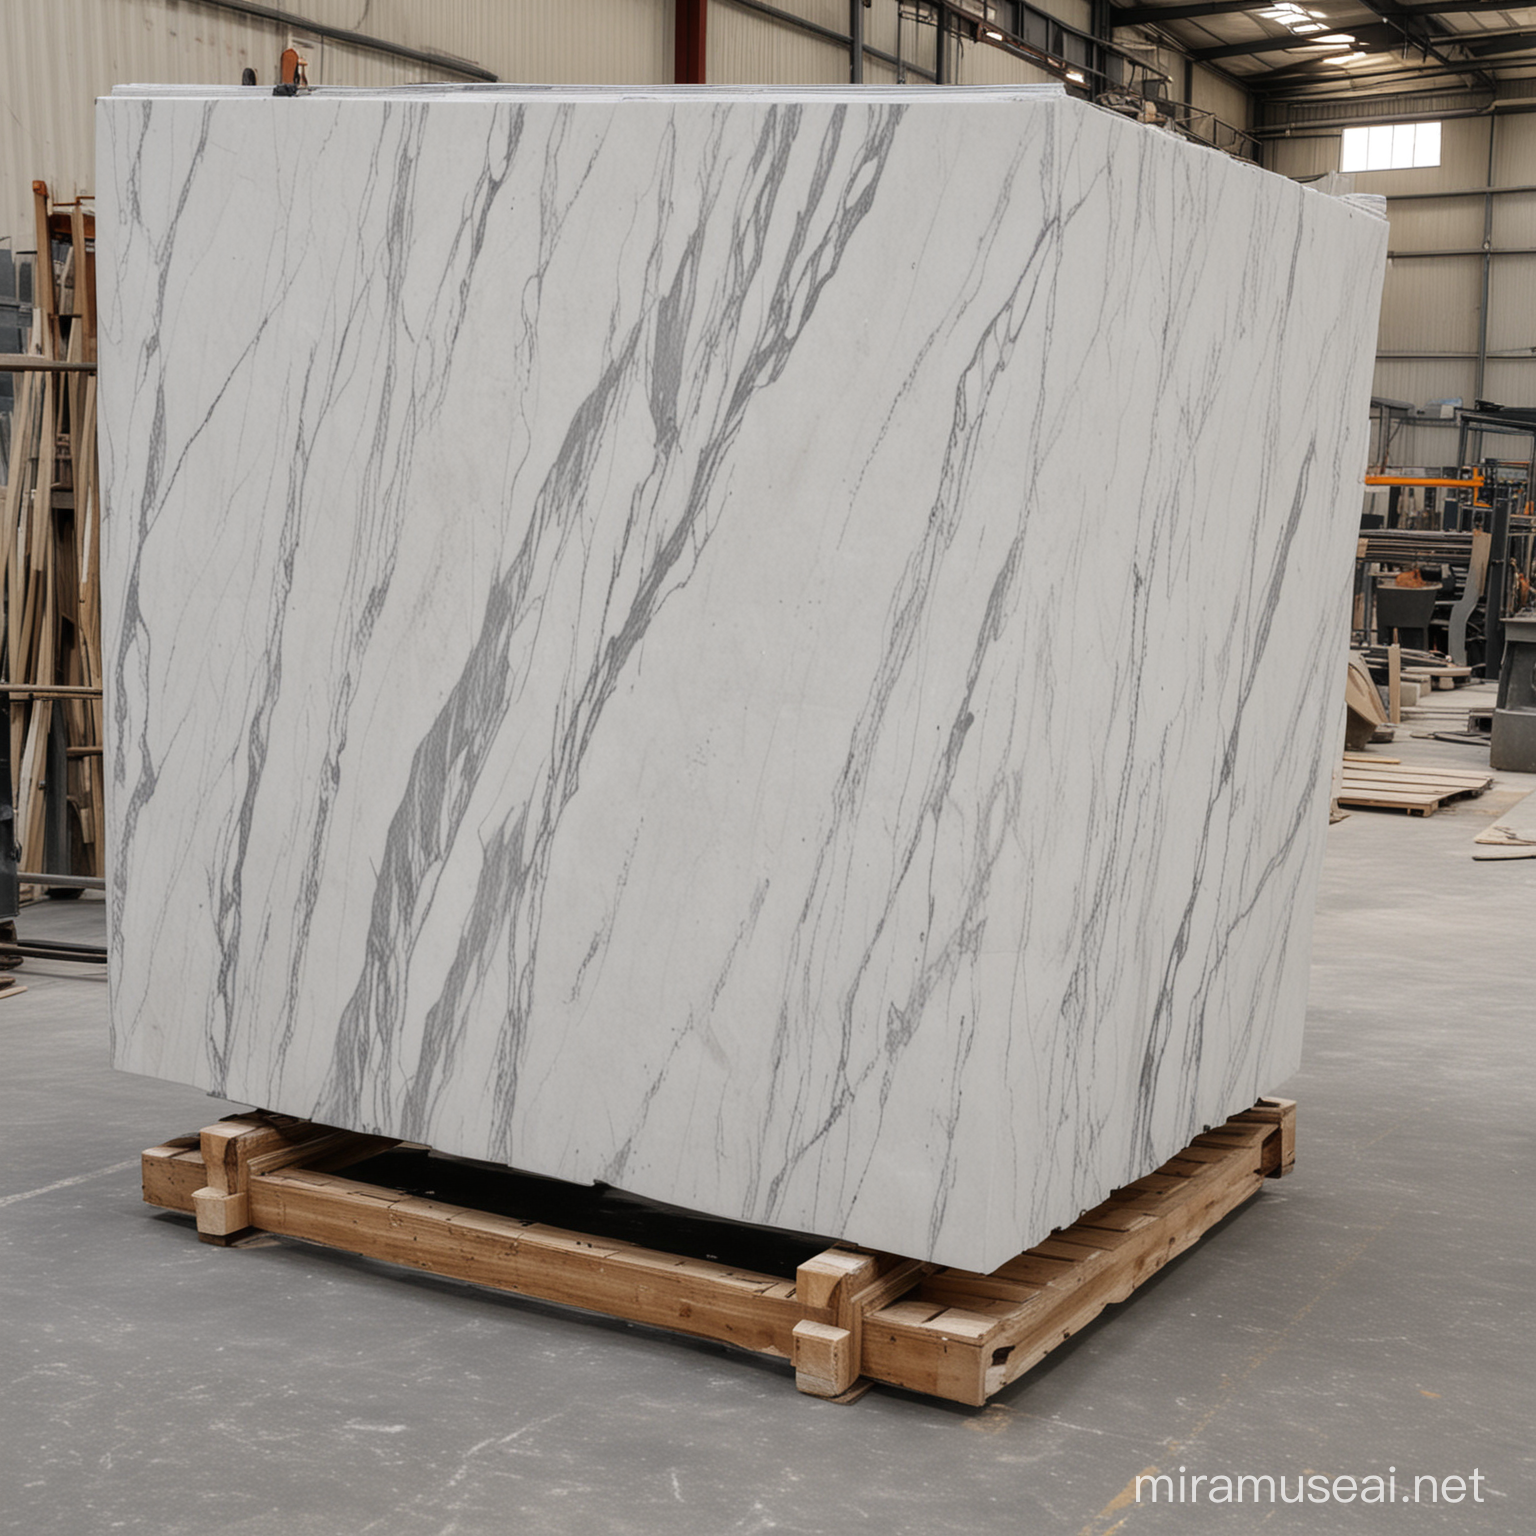 Marble manufacturing process